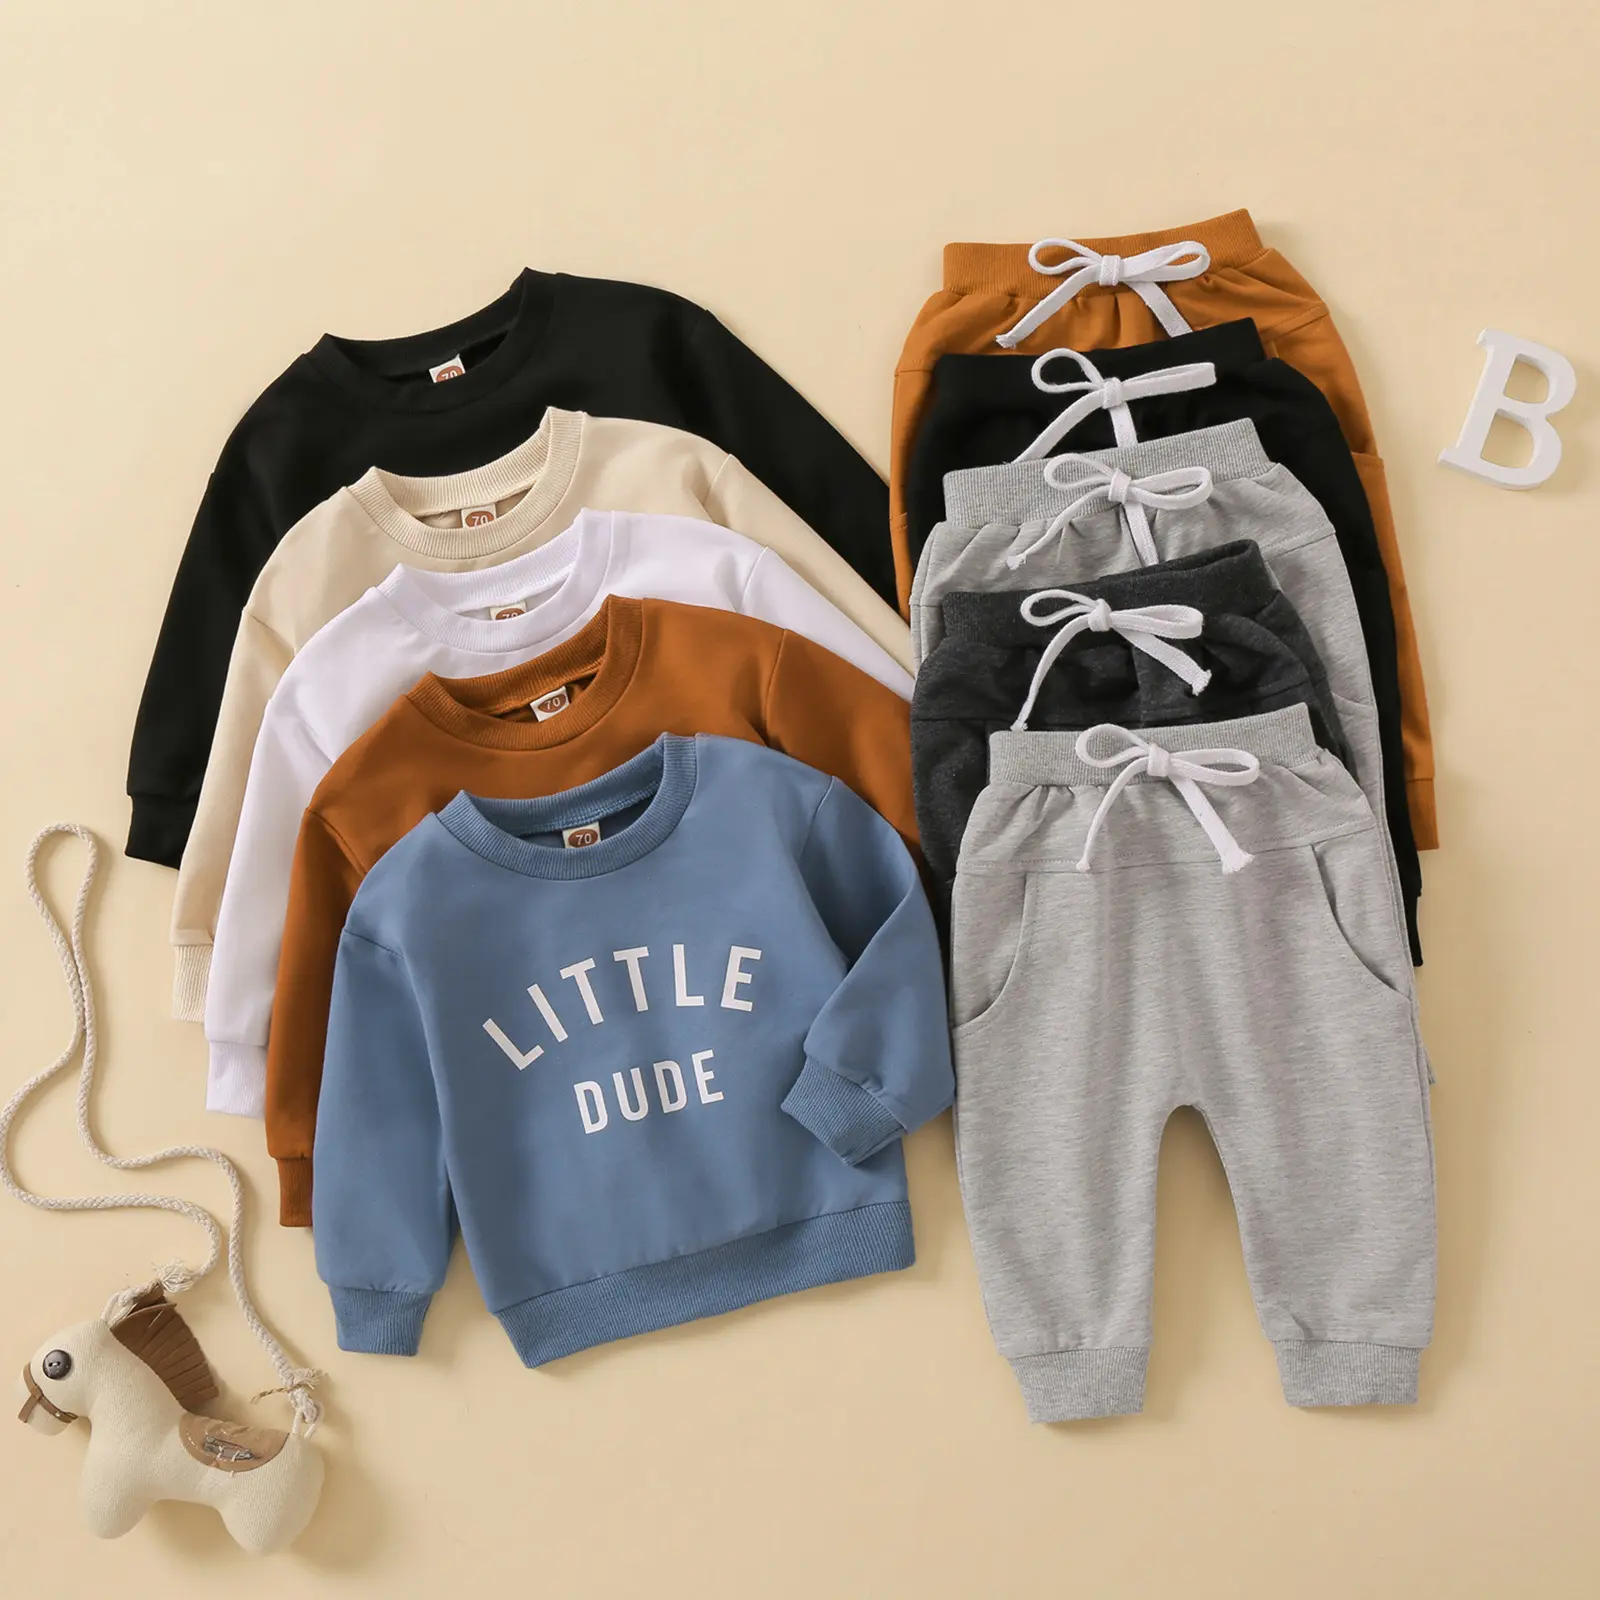 Newborn Infant Baby Clothing Sets Long Sleeve Sweater Shirt Tops Girls Pants 2pcs Fashion Outfits Infant Clothes for Boy